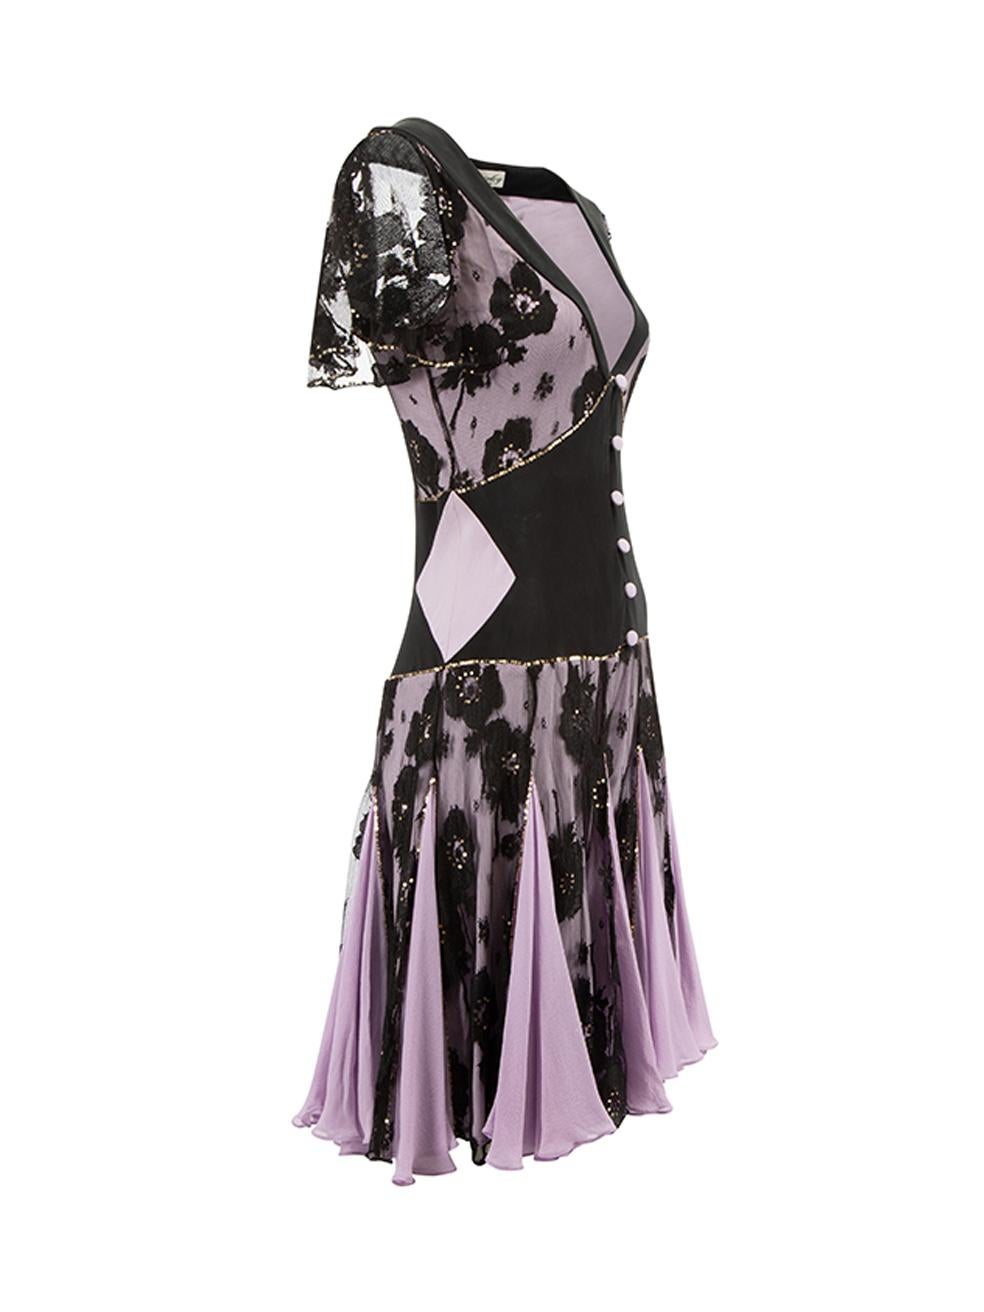 CONDITION is Very good. Minimal wear to dress is evident. Minimal wear to neckline which looks faded and there is some wear to the sequins on the exterior of this used Temperley London designer resale item. 



Details


Purple

Silk

Mini